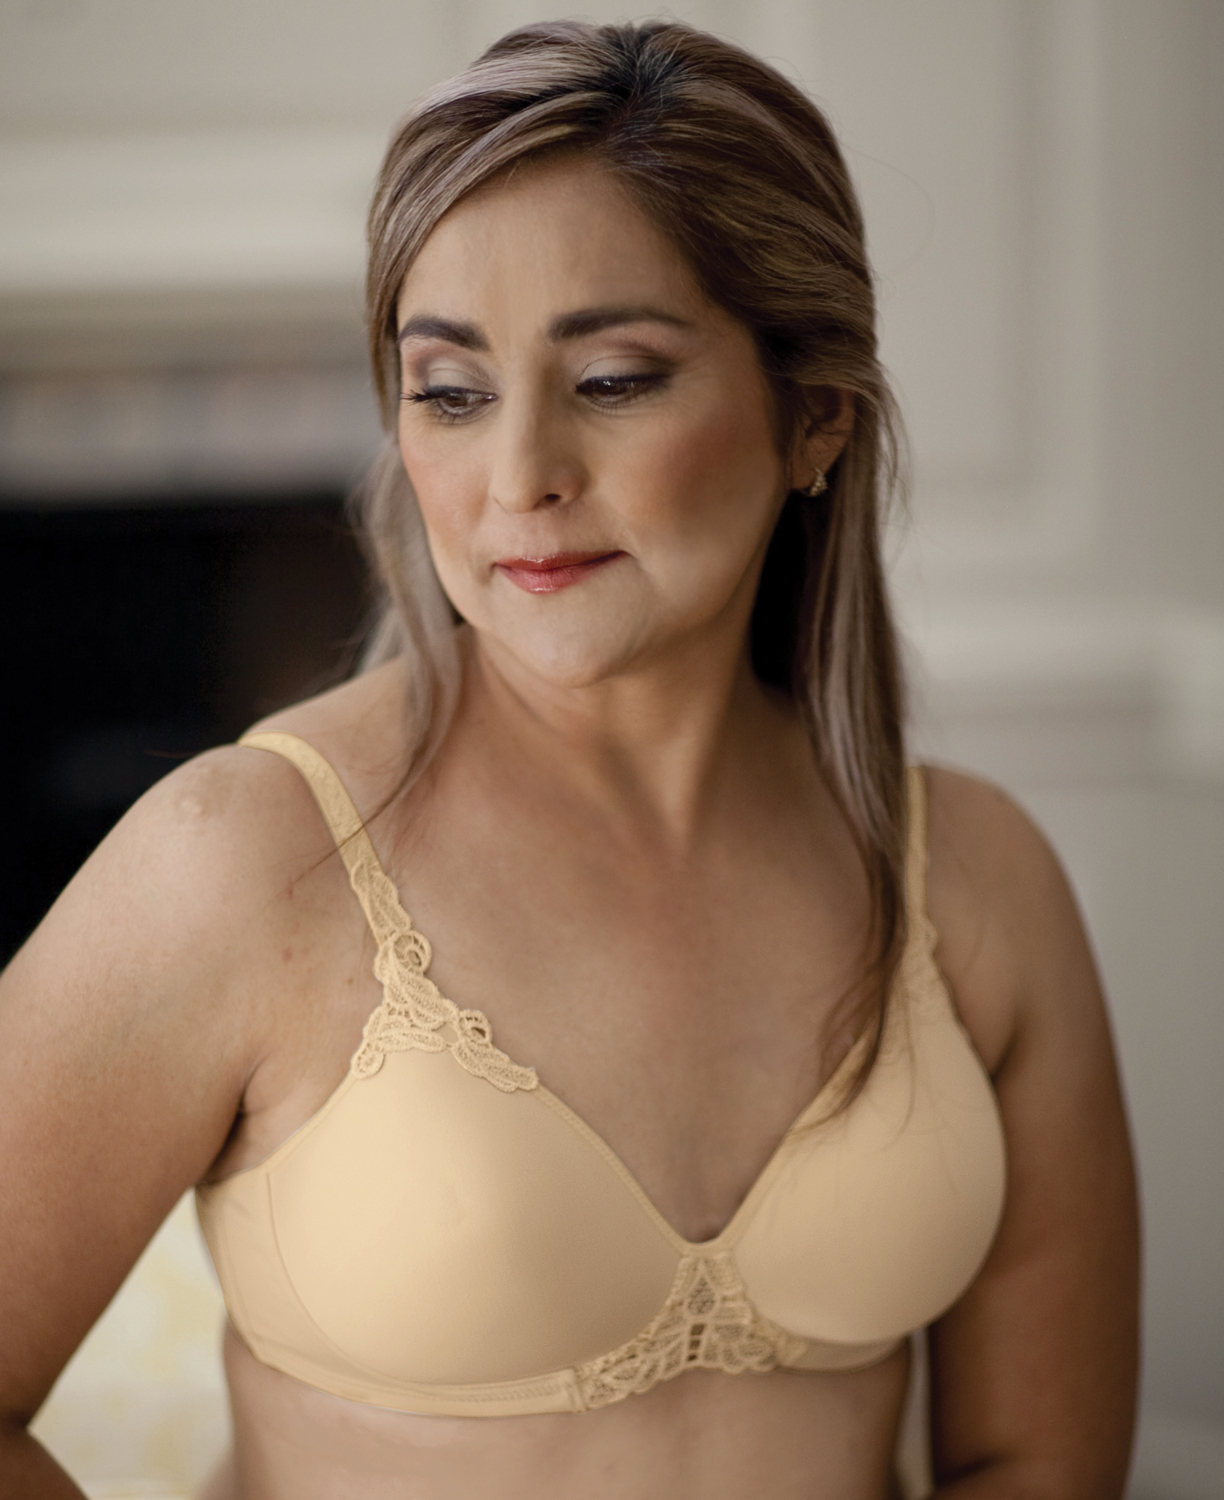 American Breast Care T-Shirt Lace Contour Mastectomy Bra